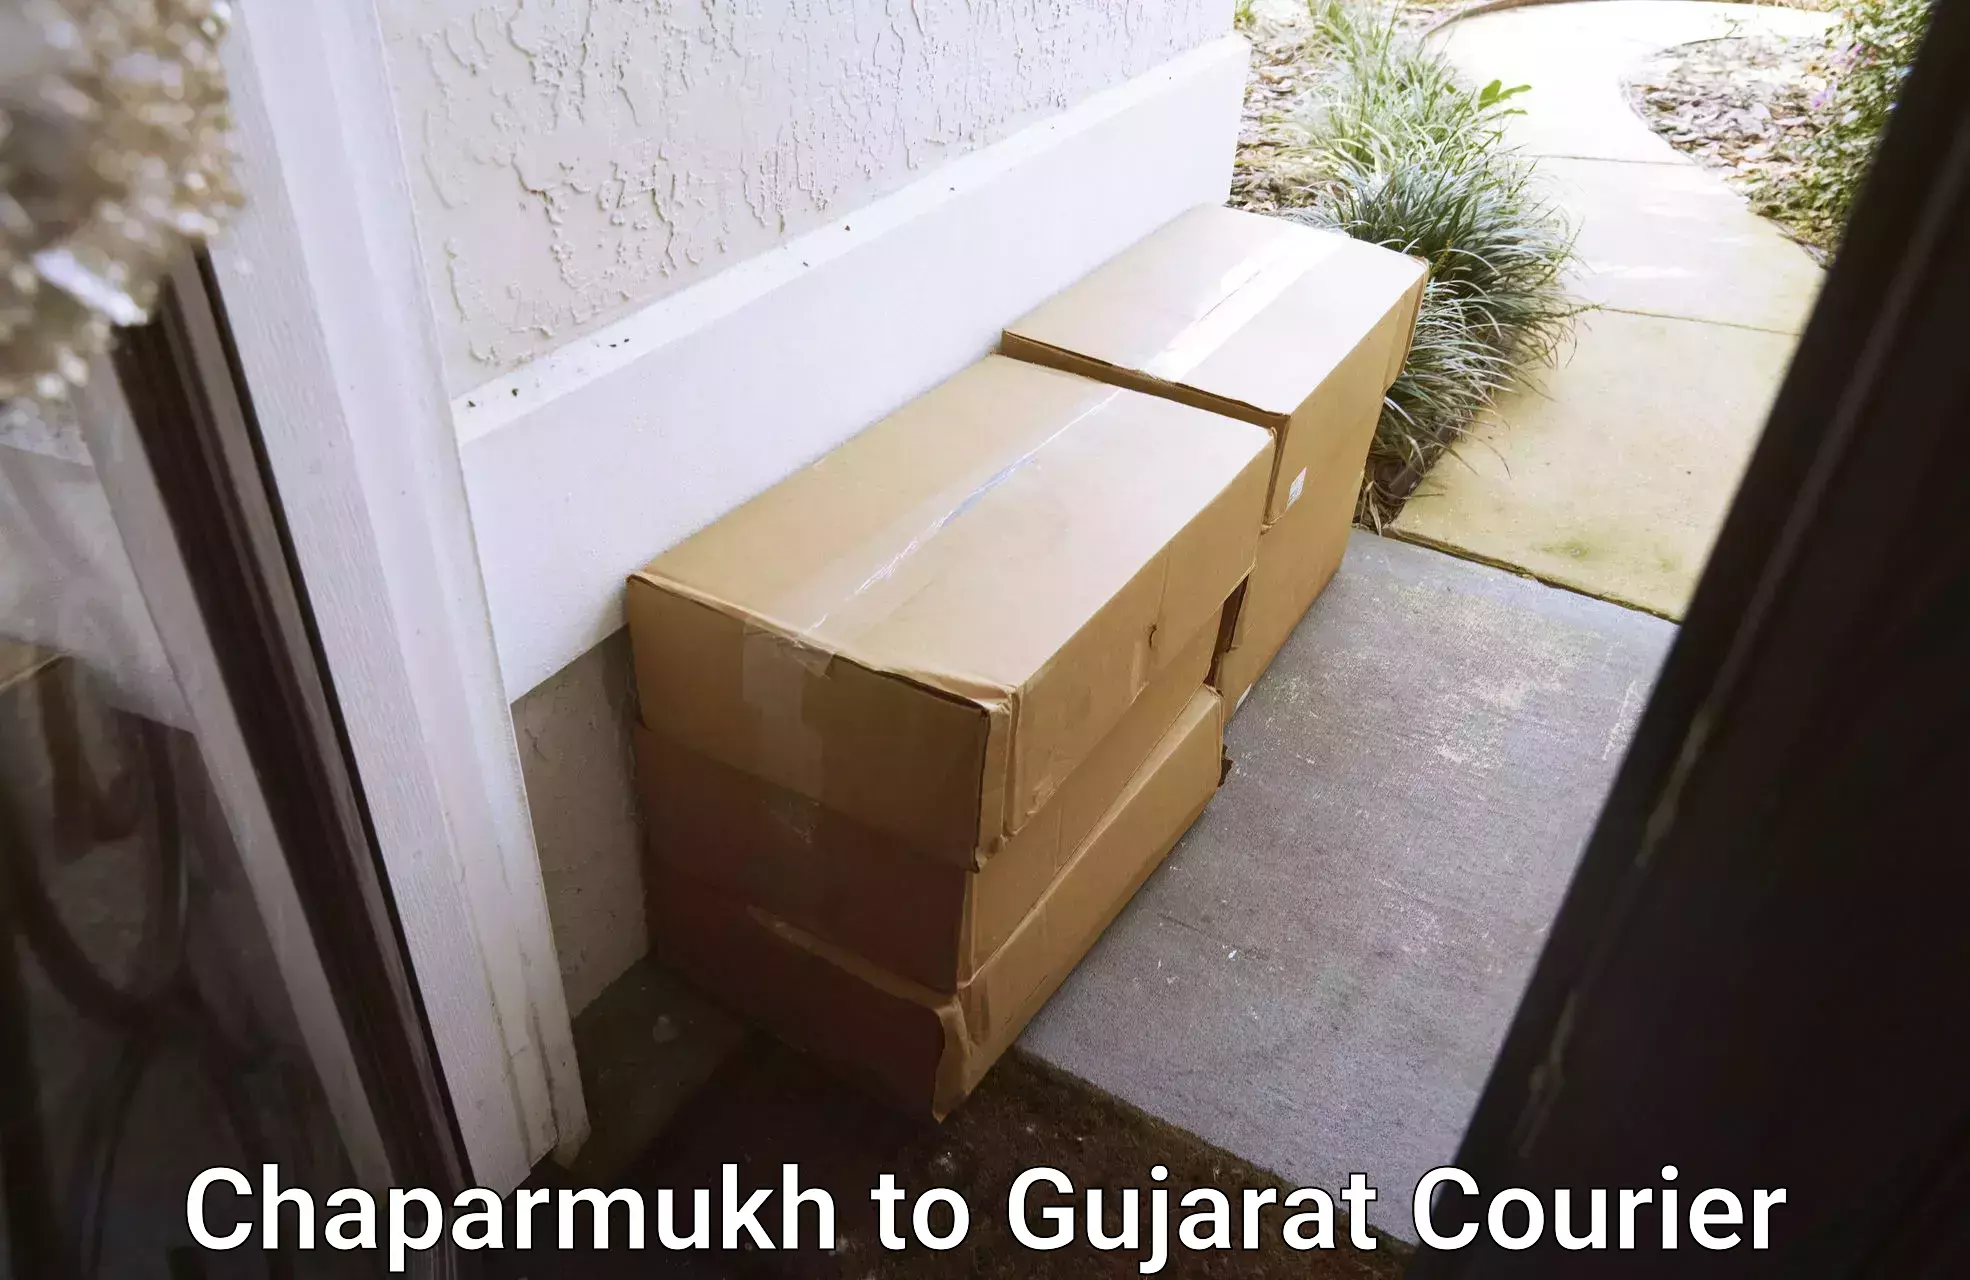 On-call courier service Chaparmukh to Sanand